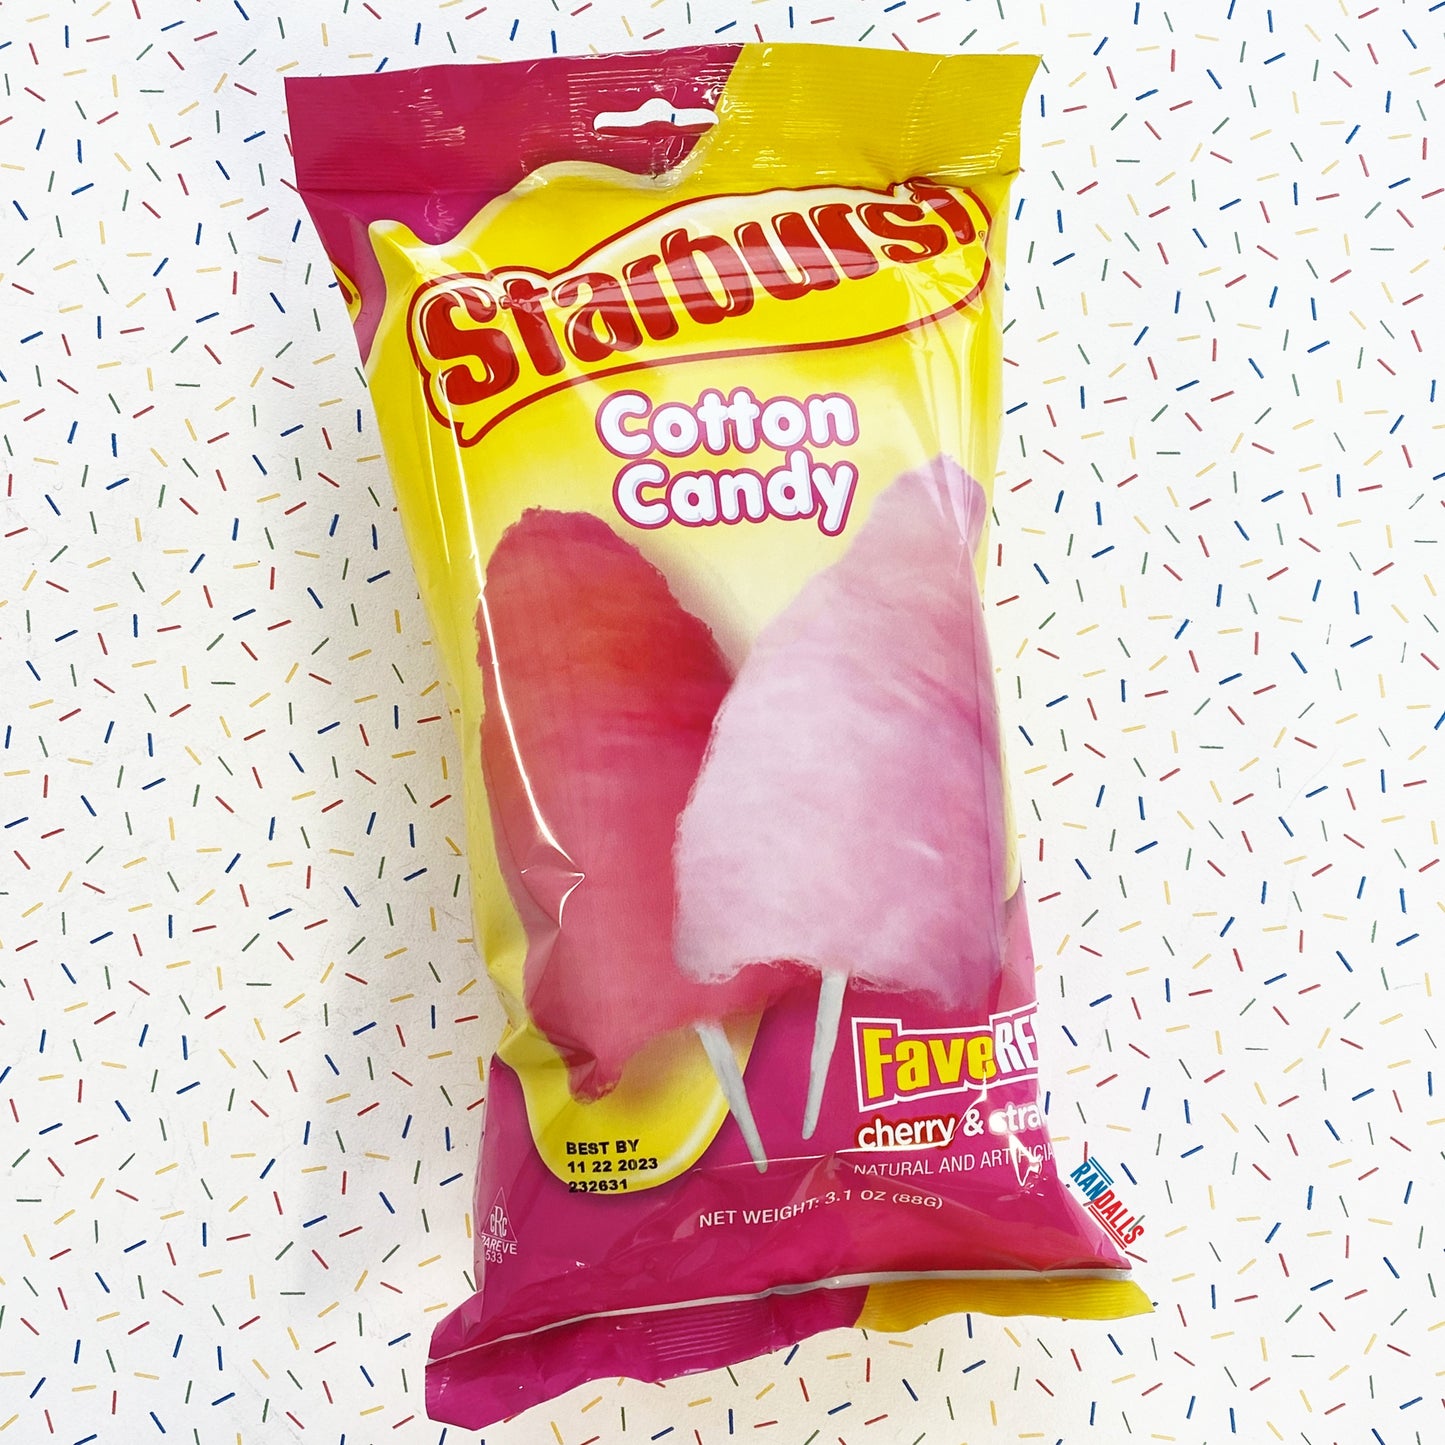 starburst cotton candy, cherry and strawberry, candy floss , sweet, sugar, candy, usa, randalls